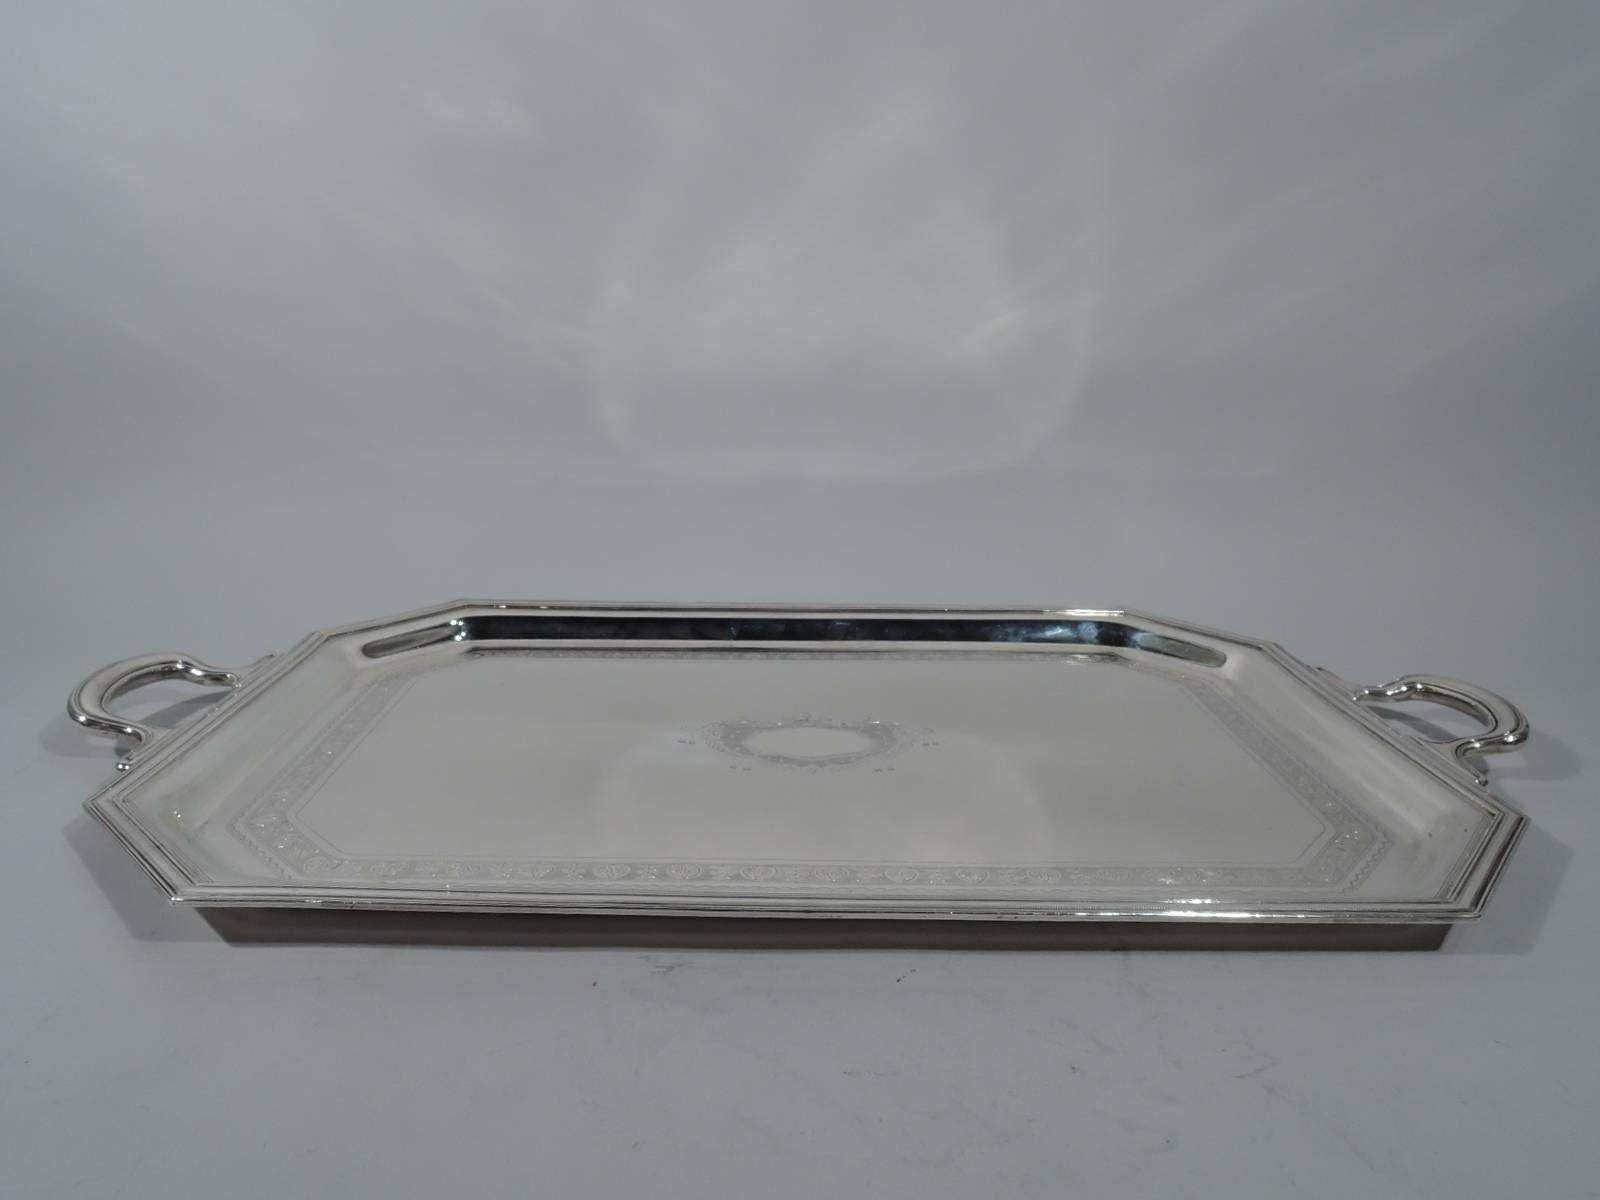 Edwardian sterling silver tea tray. Made by Graff, Washbourne & Dunn in New York. Rectangular with chamfered corners and scroll end handles with sinuous mounts. Molded rim with pointille bands. Well has engraved border with alternating palmettes and